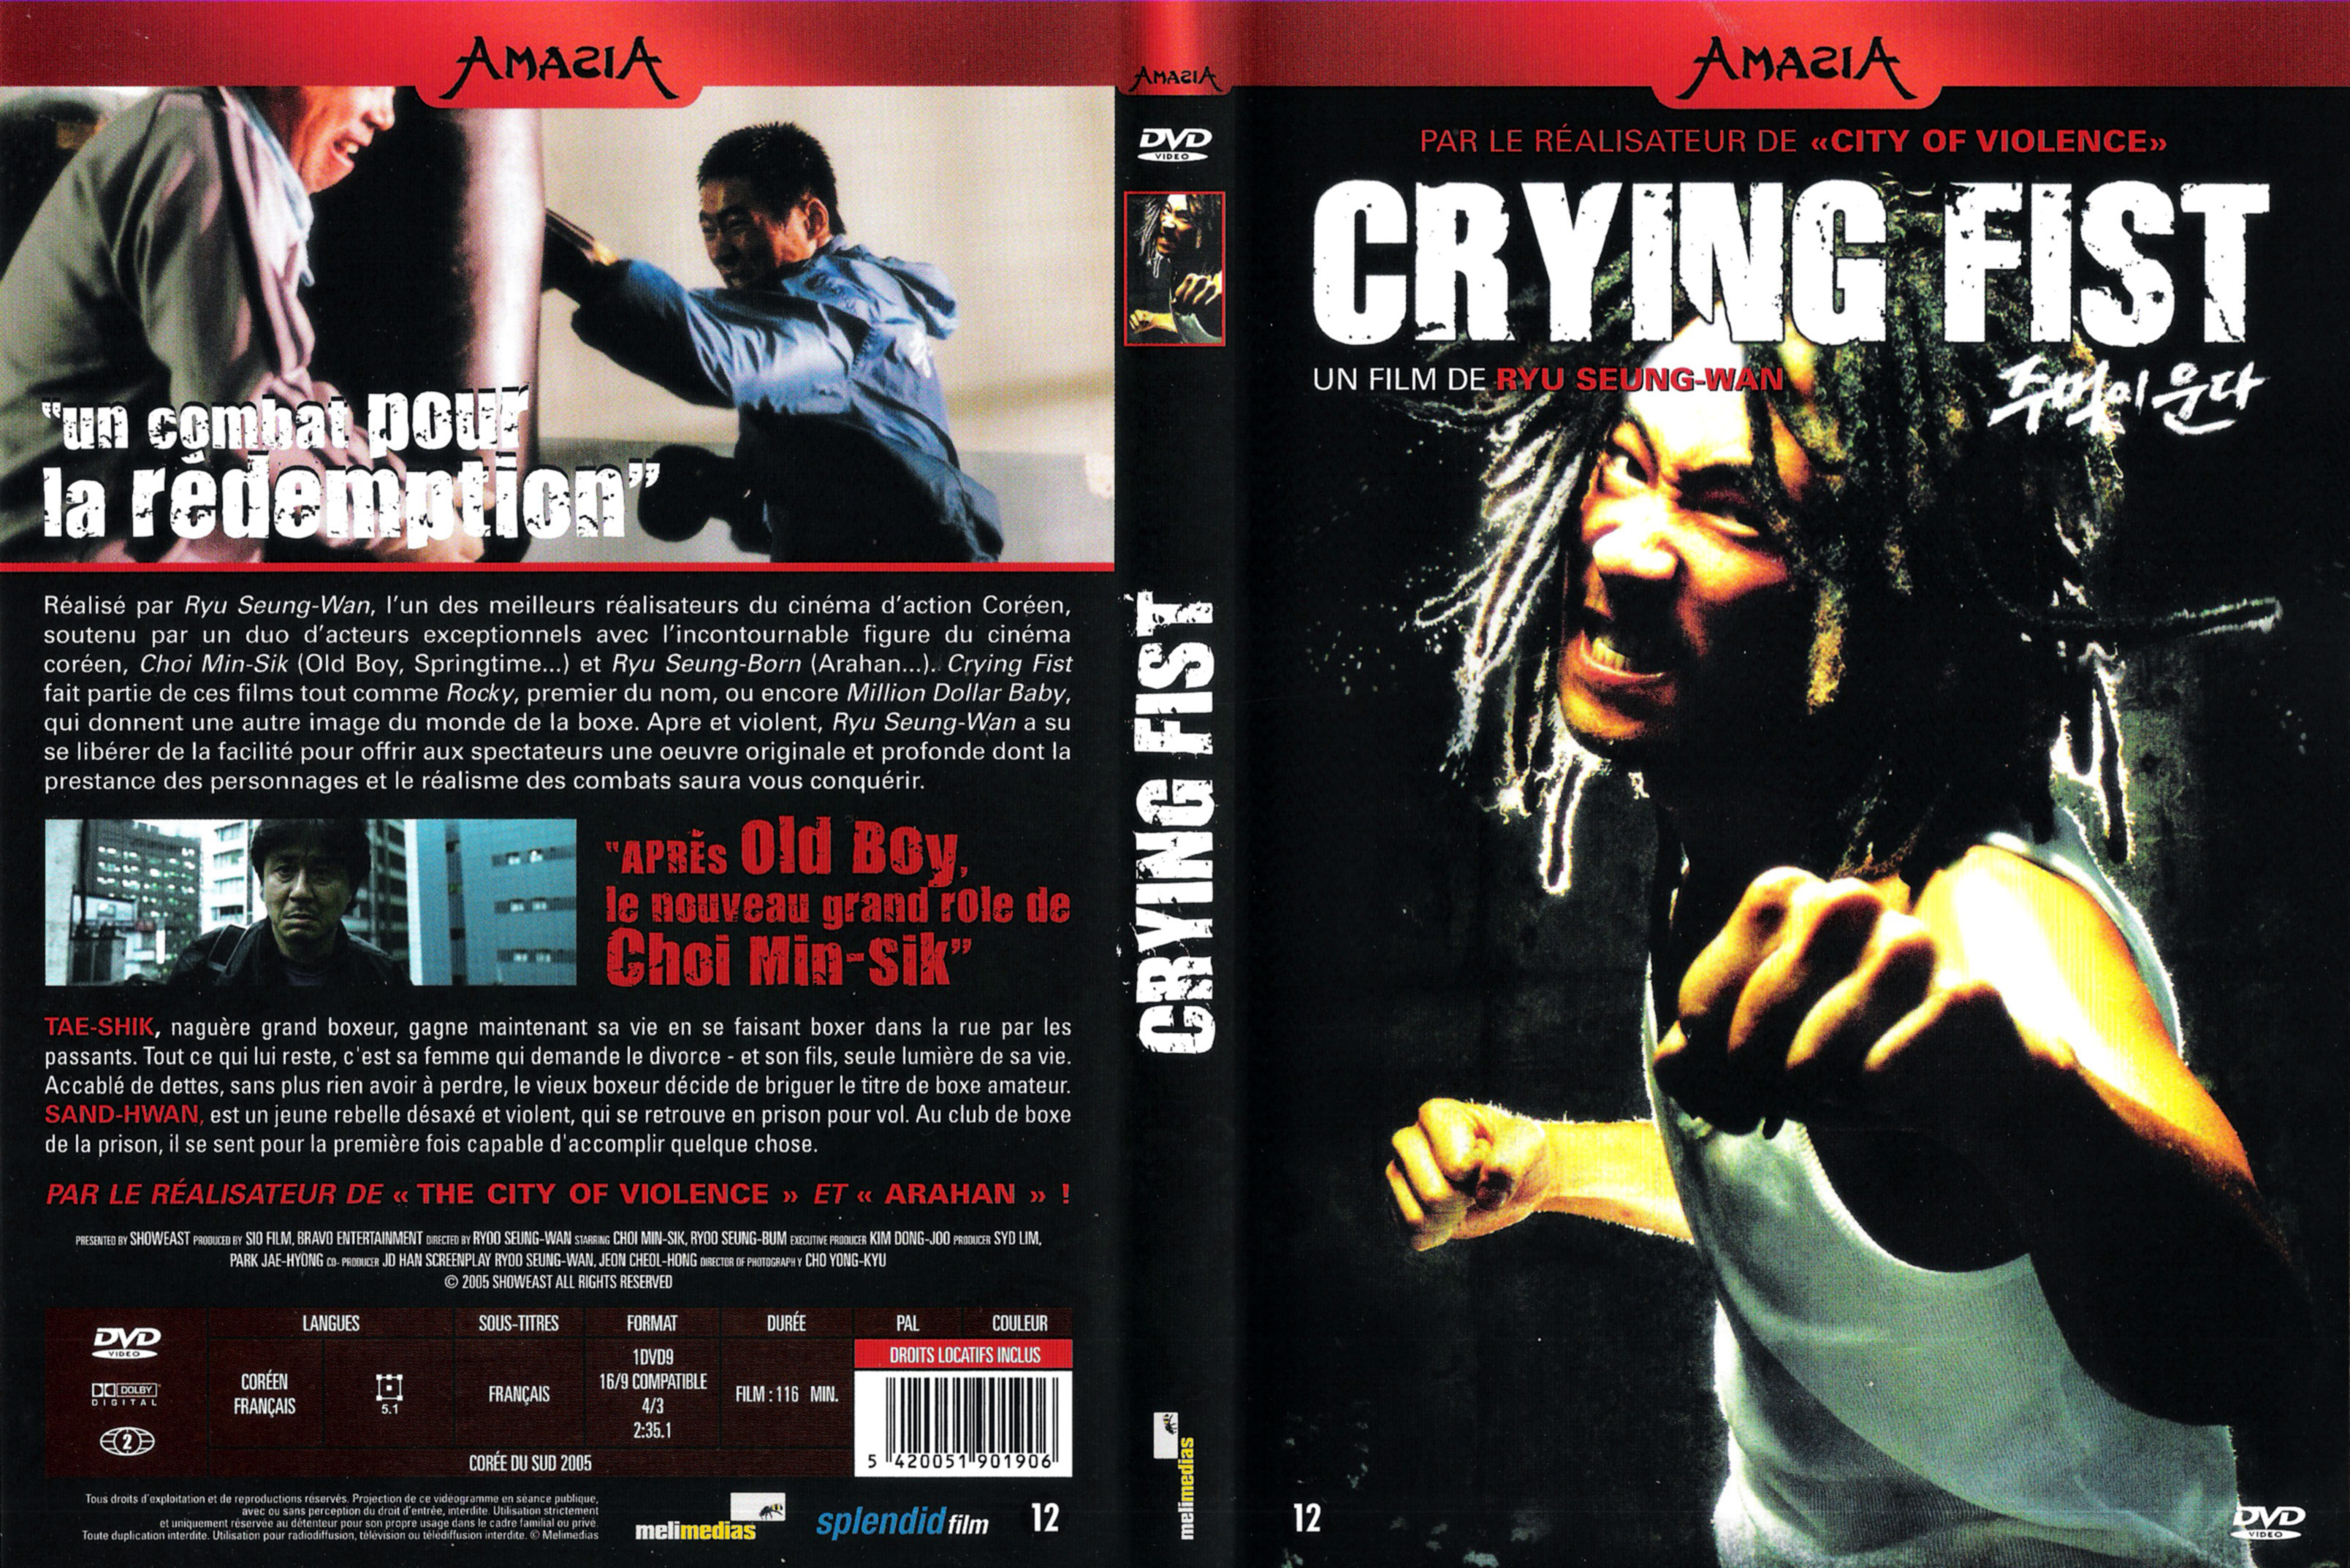 Jaquette DVD Crying fist